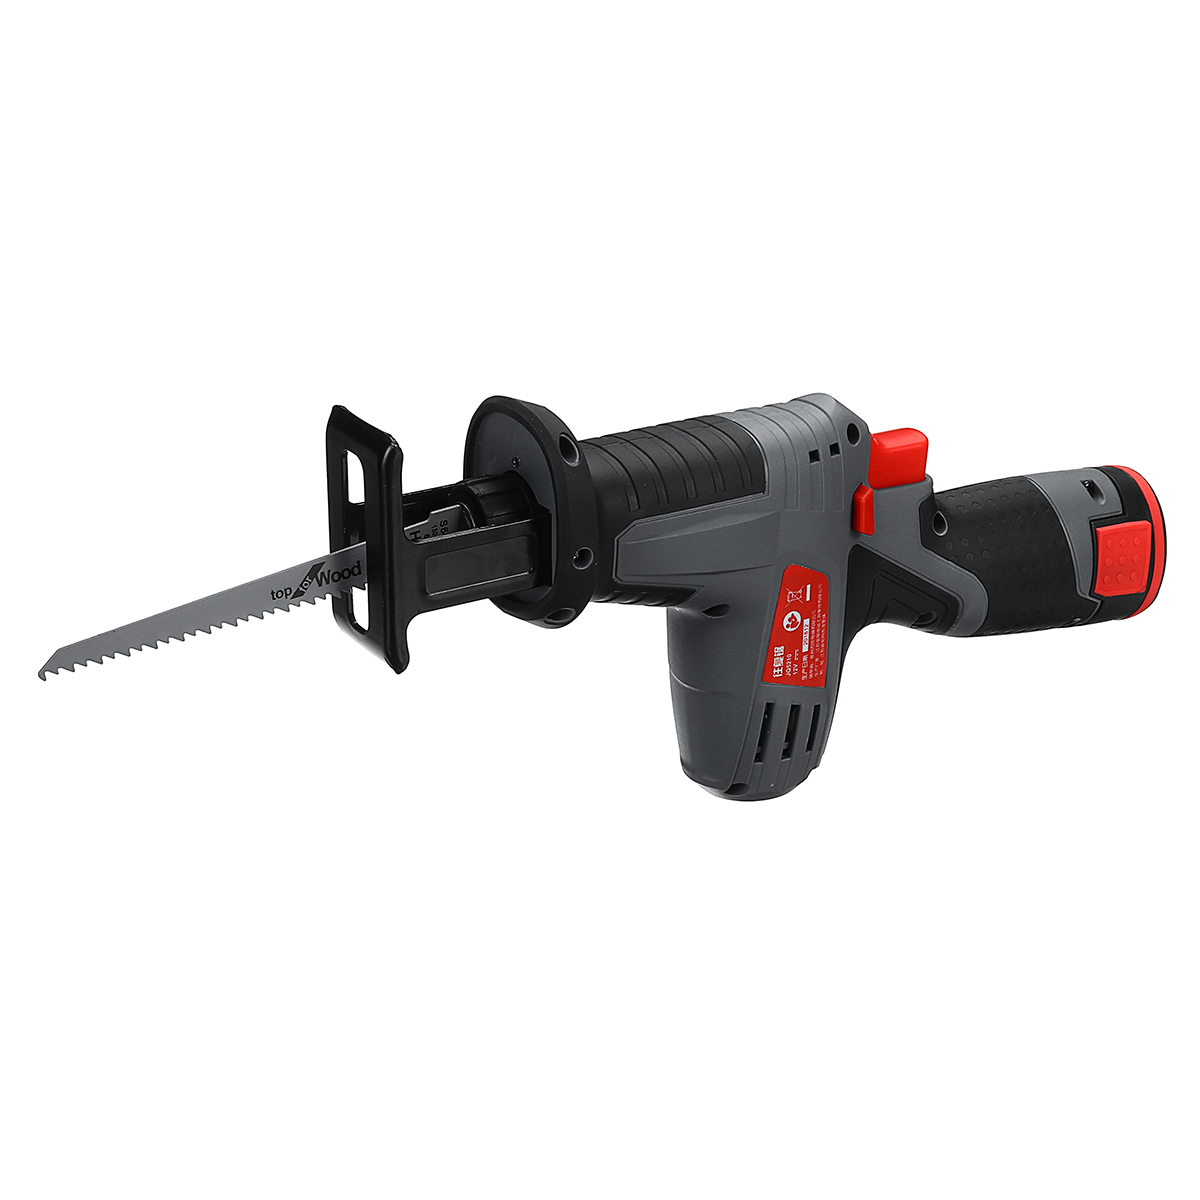 

12V Lithium-Ion Cordless Reciprocating Saw Kit with 4x Wood Blades Wood Metal Cutting Power Tools